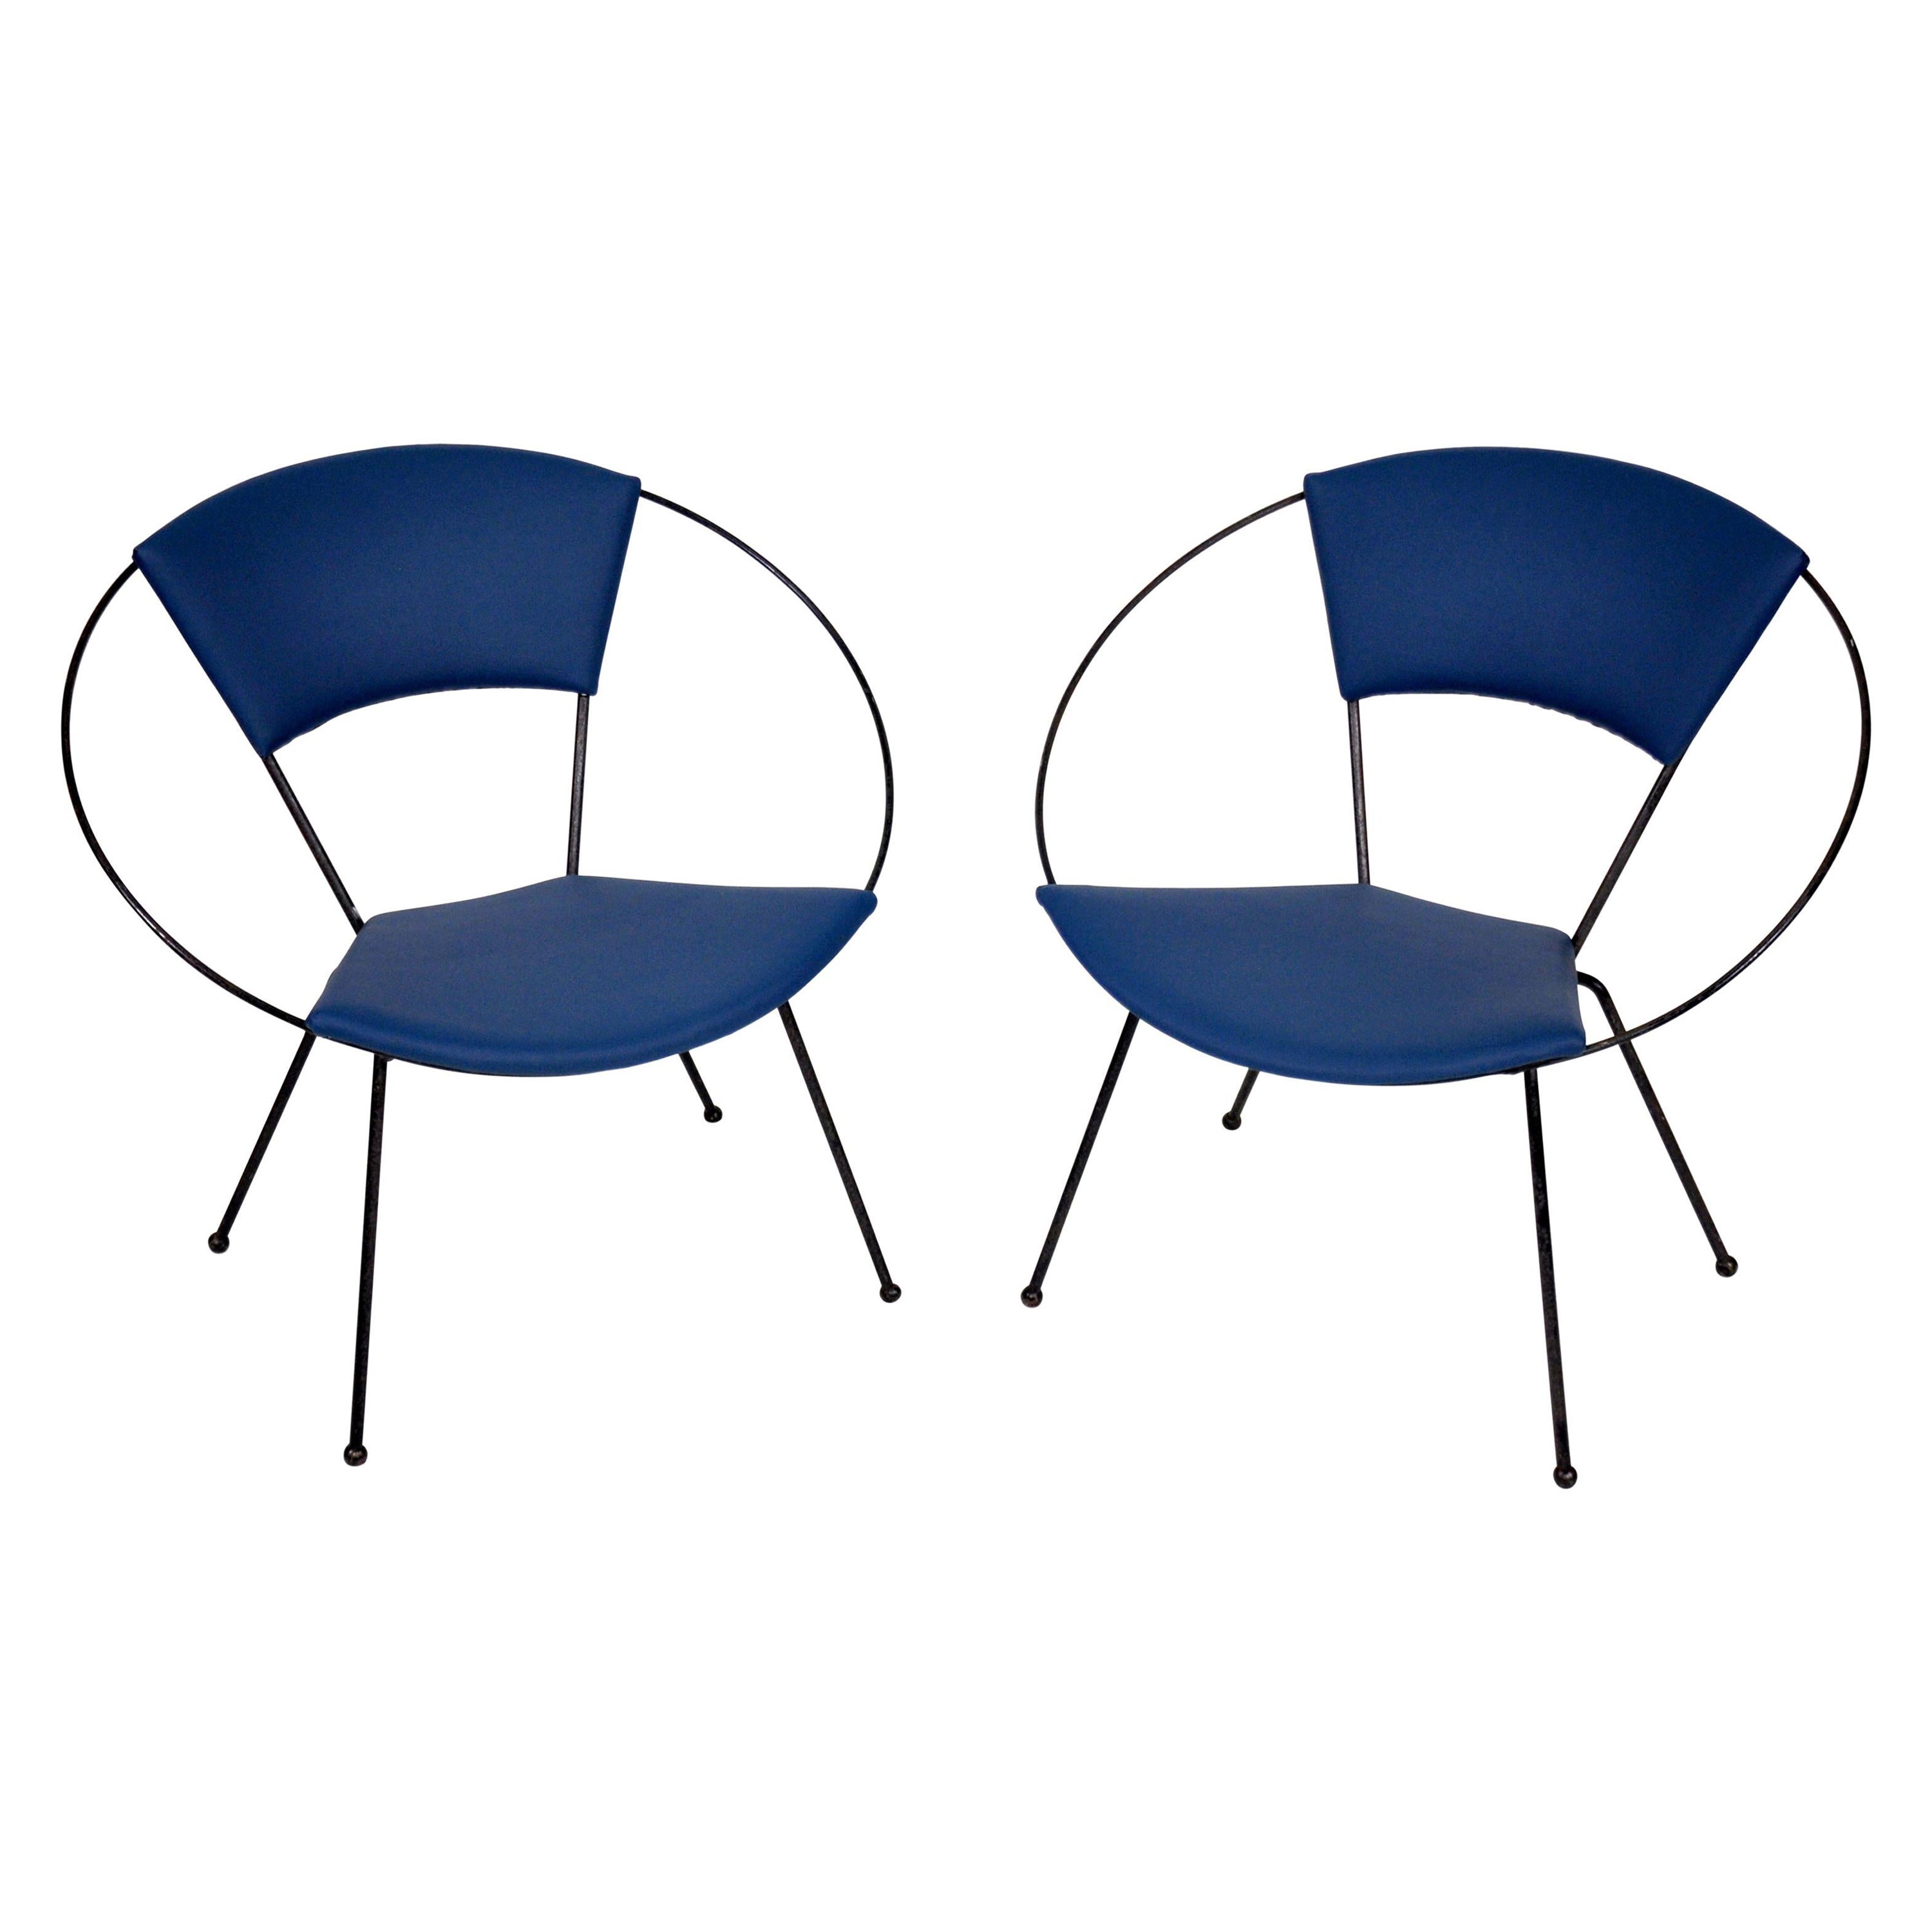 Pair of Mid-Century Black Iron Hoop Chairs by Cicchelli for Reilly-Wolff, 1950s